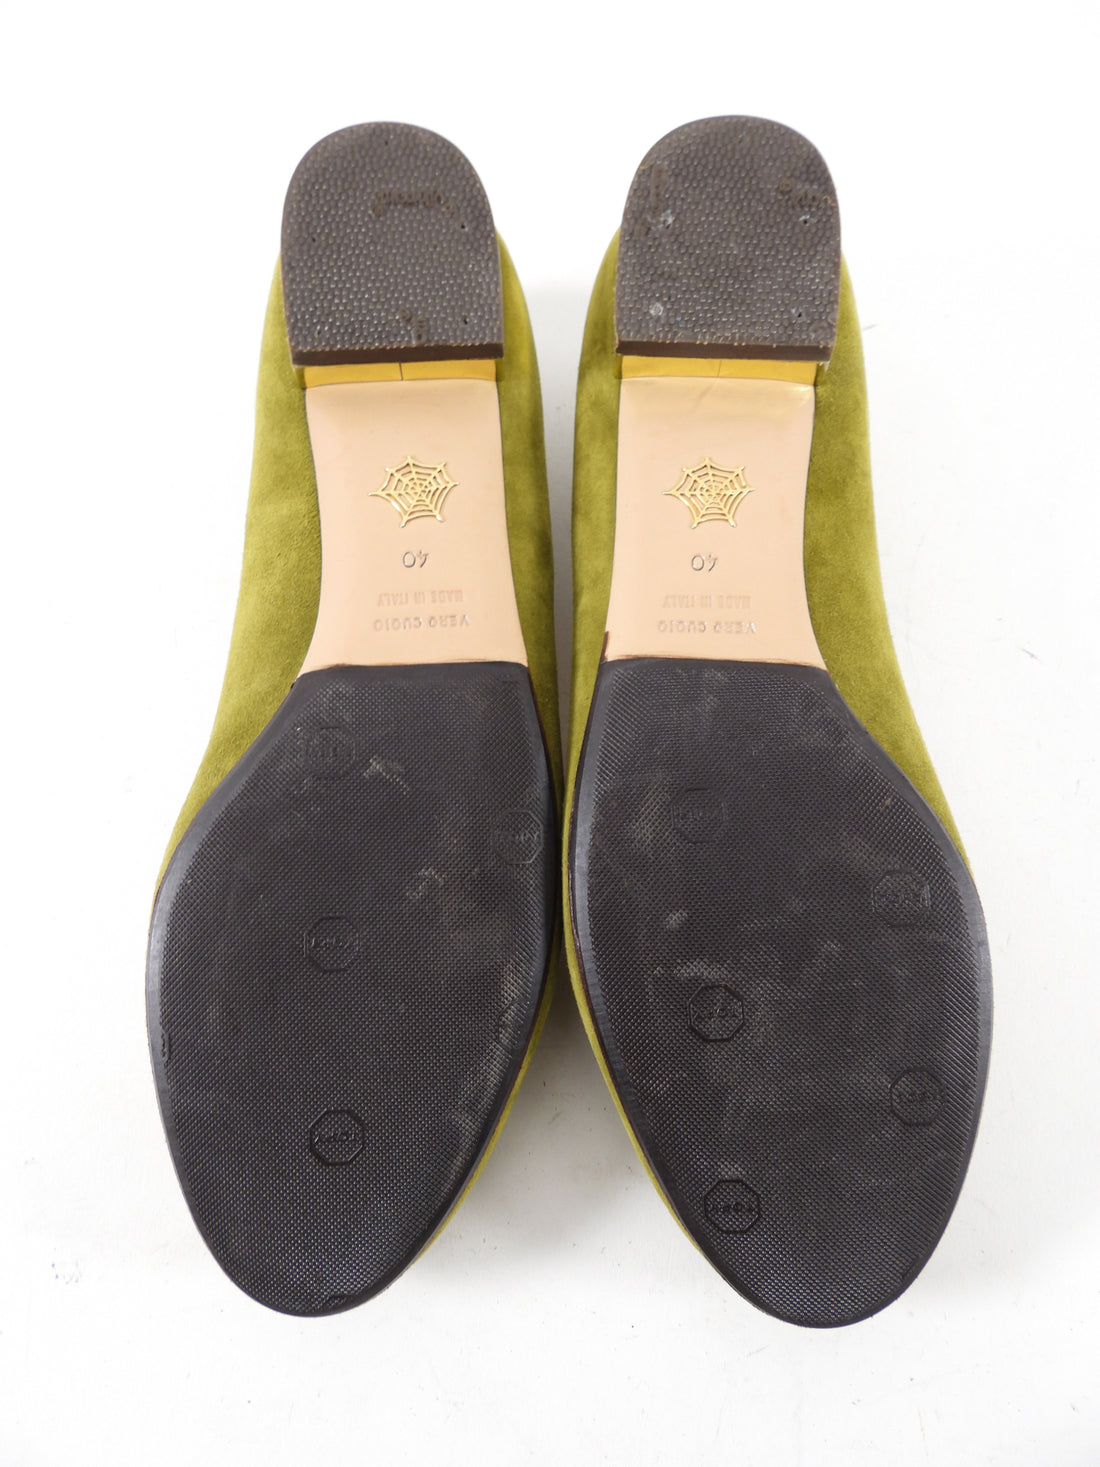 Charlotte Olympia Olive Green Suede Enamel Flats - 40